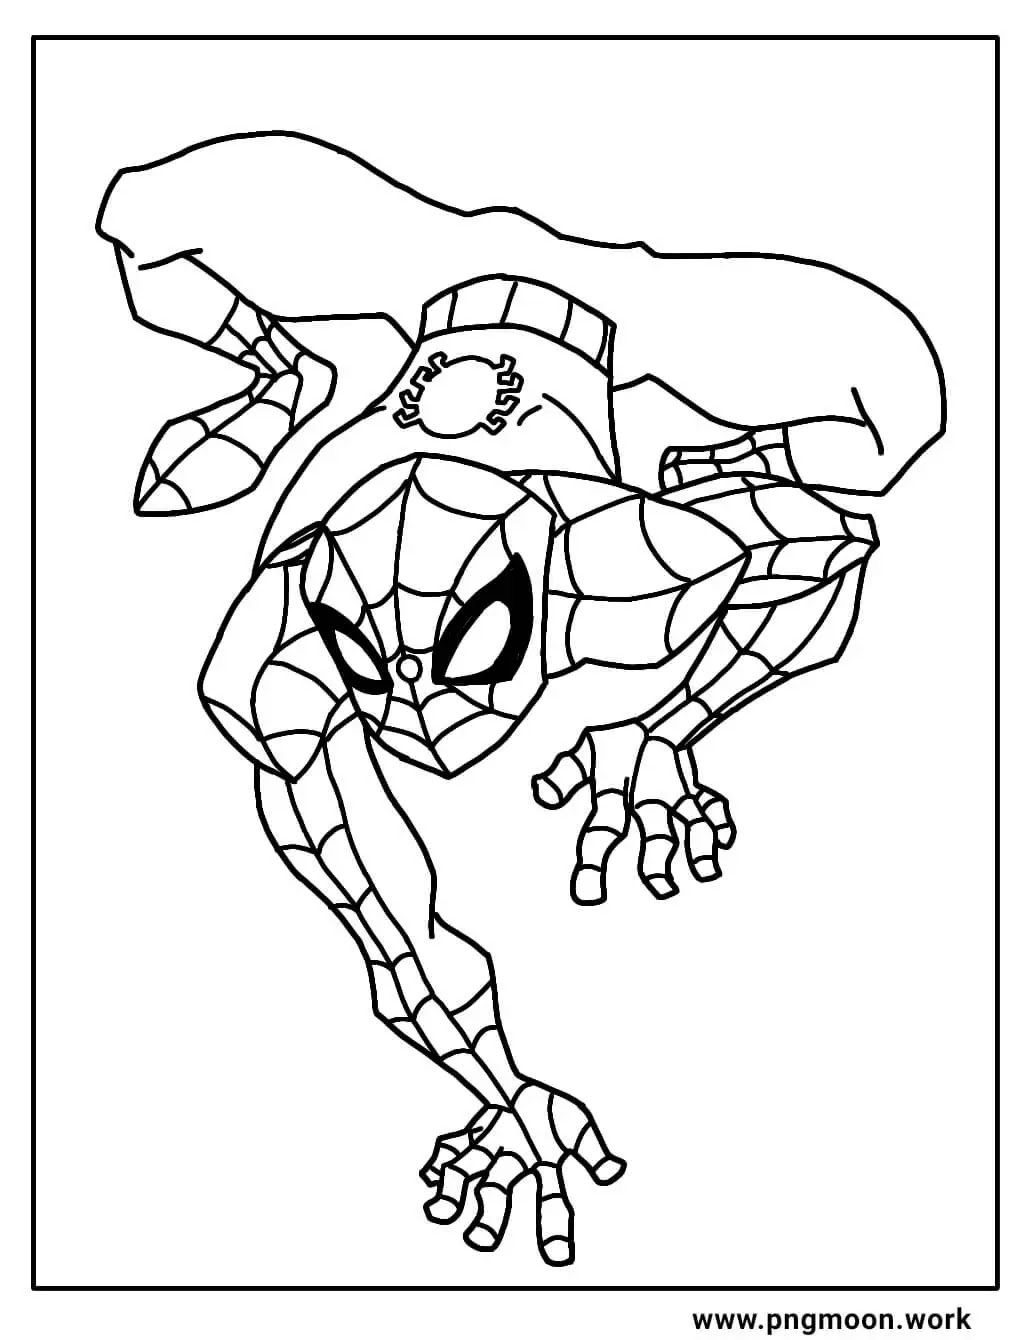 Spiderman Coloring page